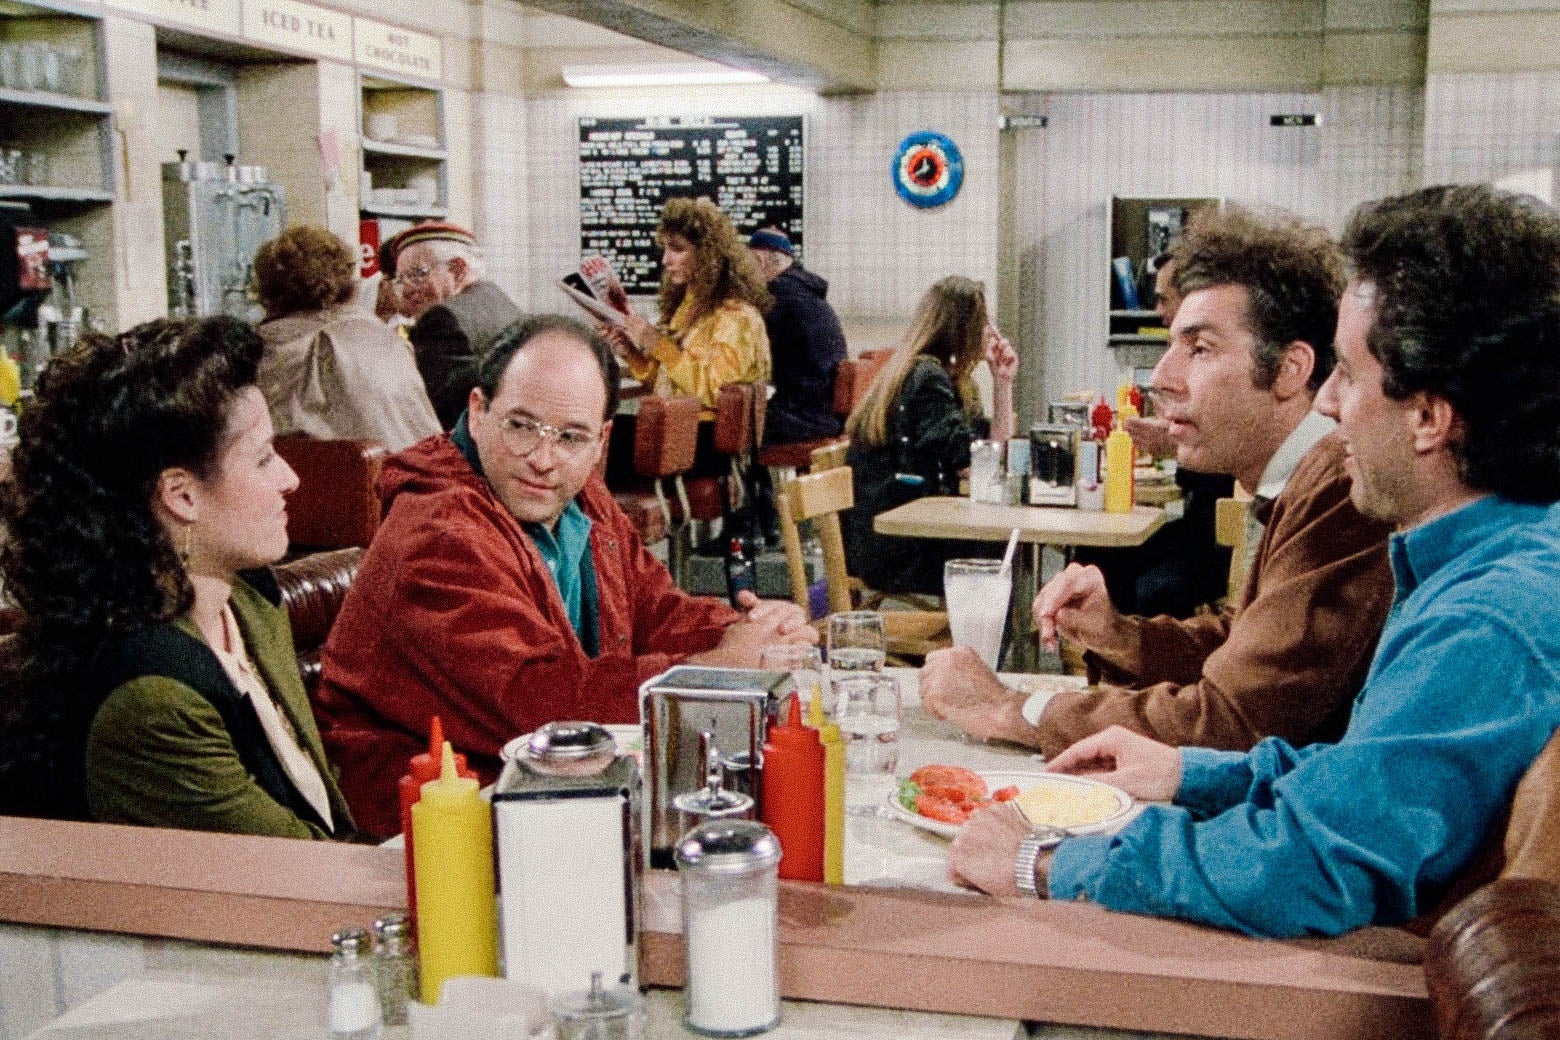 Seinfeld streaming on Netflix: Why it looks different in widescreen